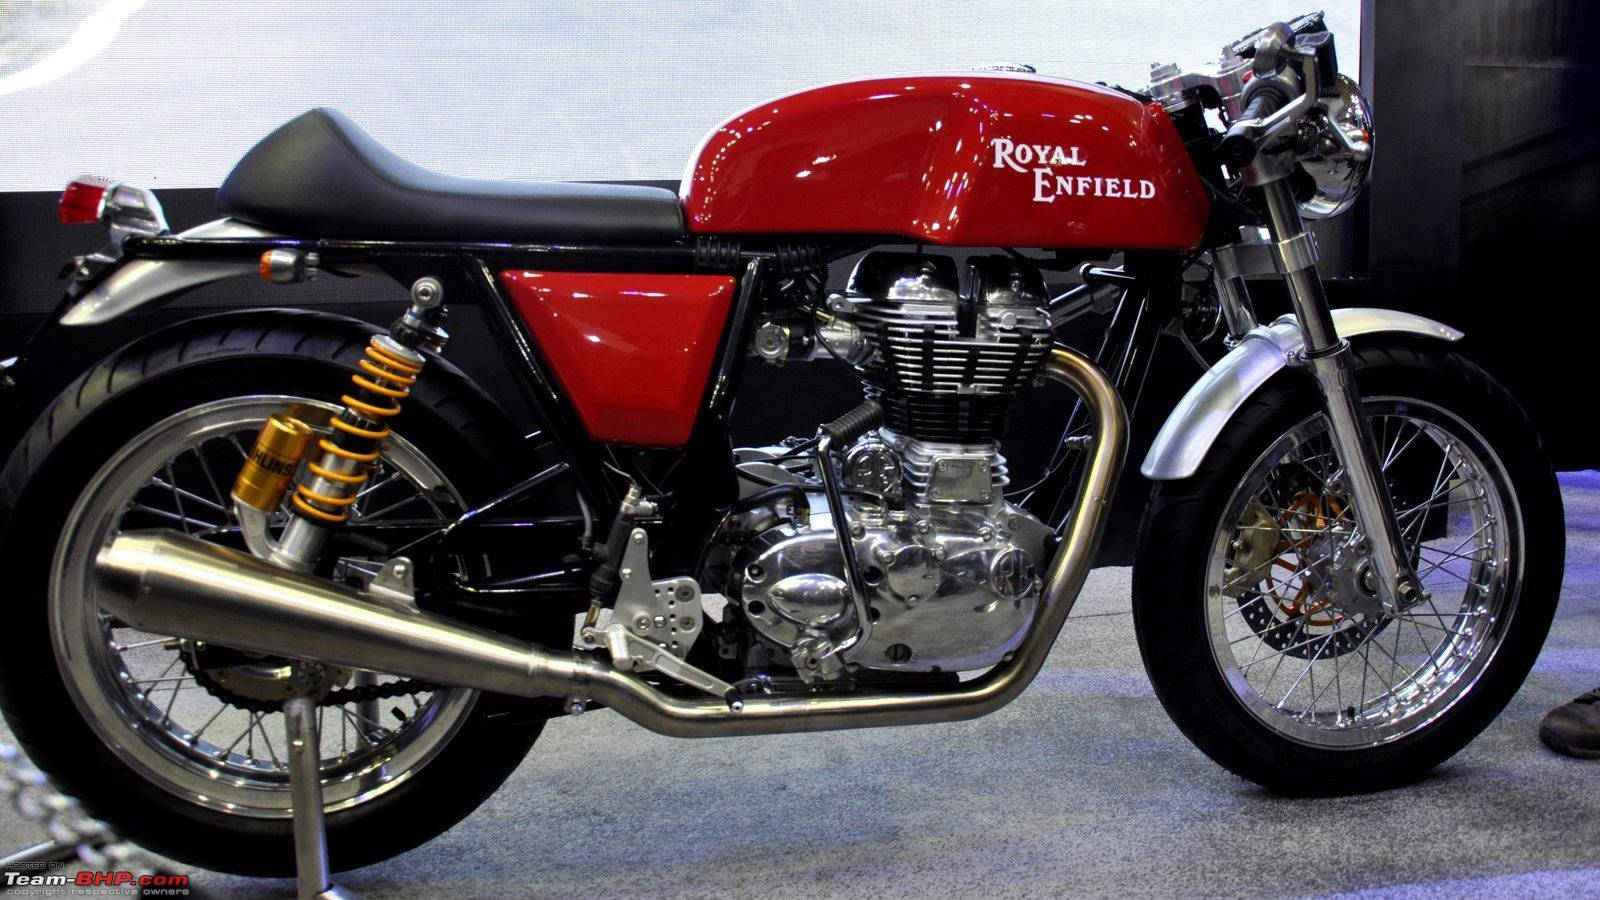 Candy Red Royal Enfield Hd Wallpaper